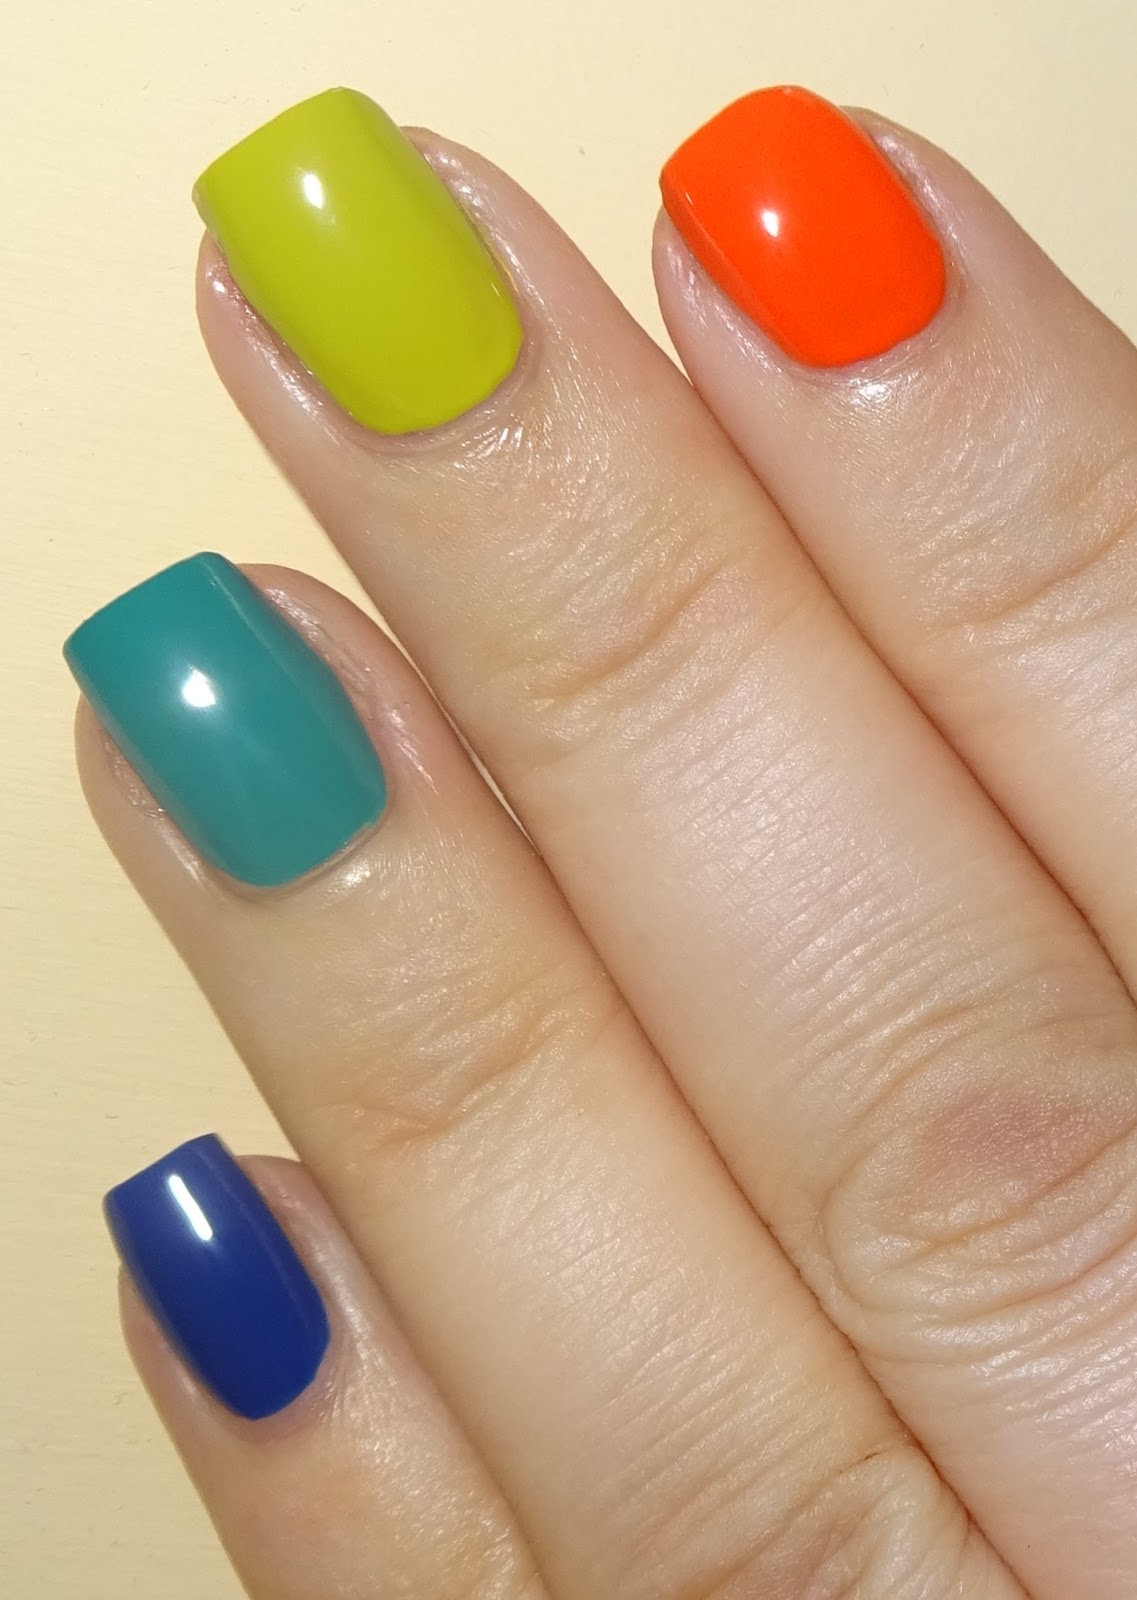 Wendy's Delights: Ombre & Skittle Nails using Avon Nail Enamels